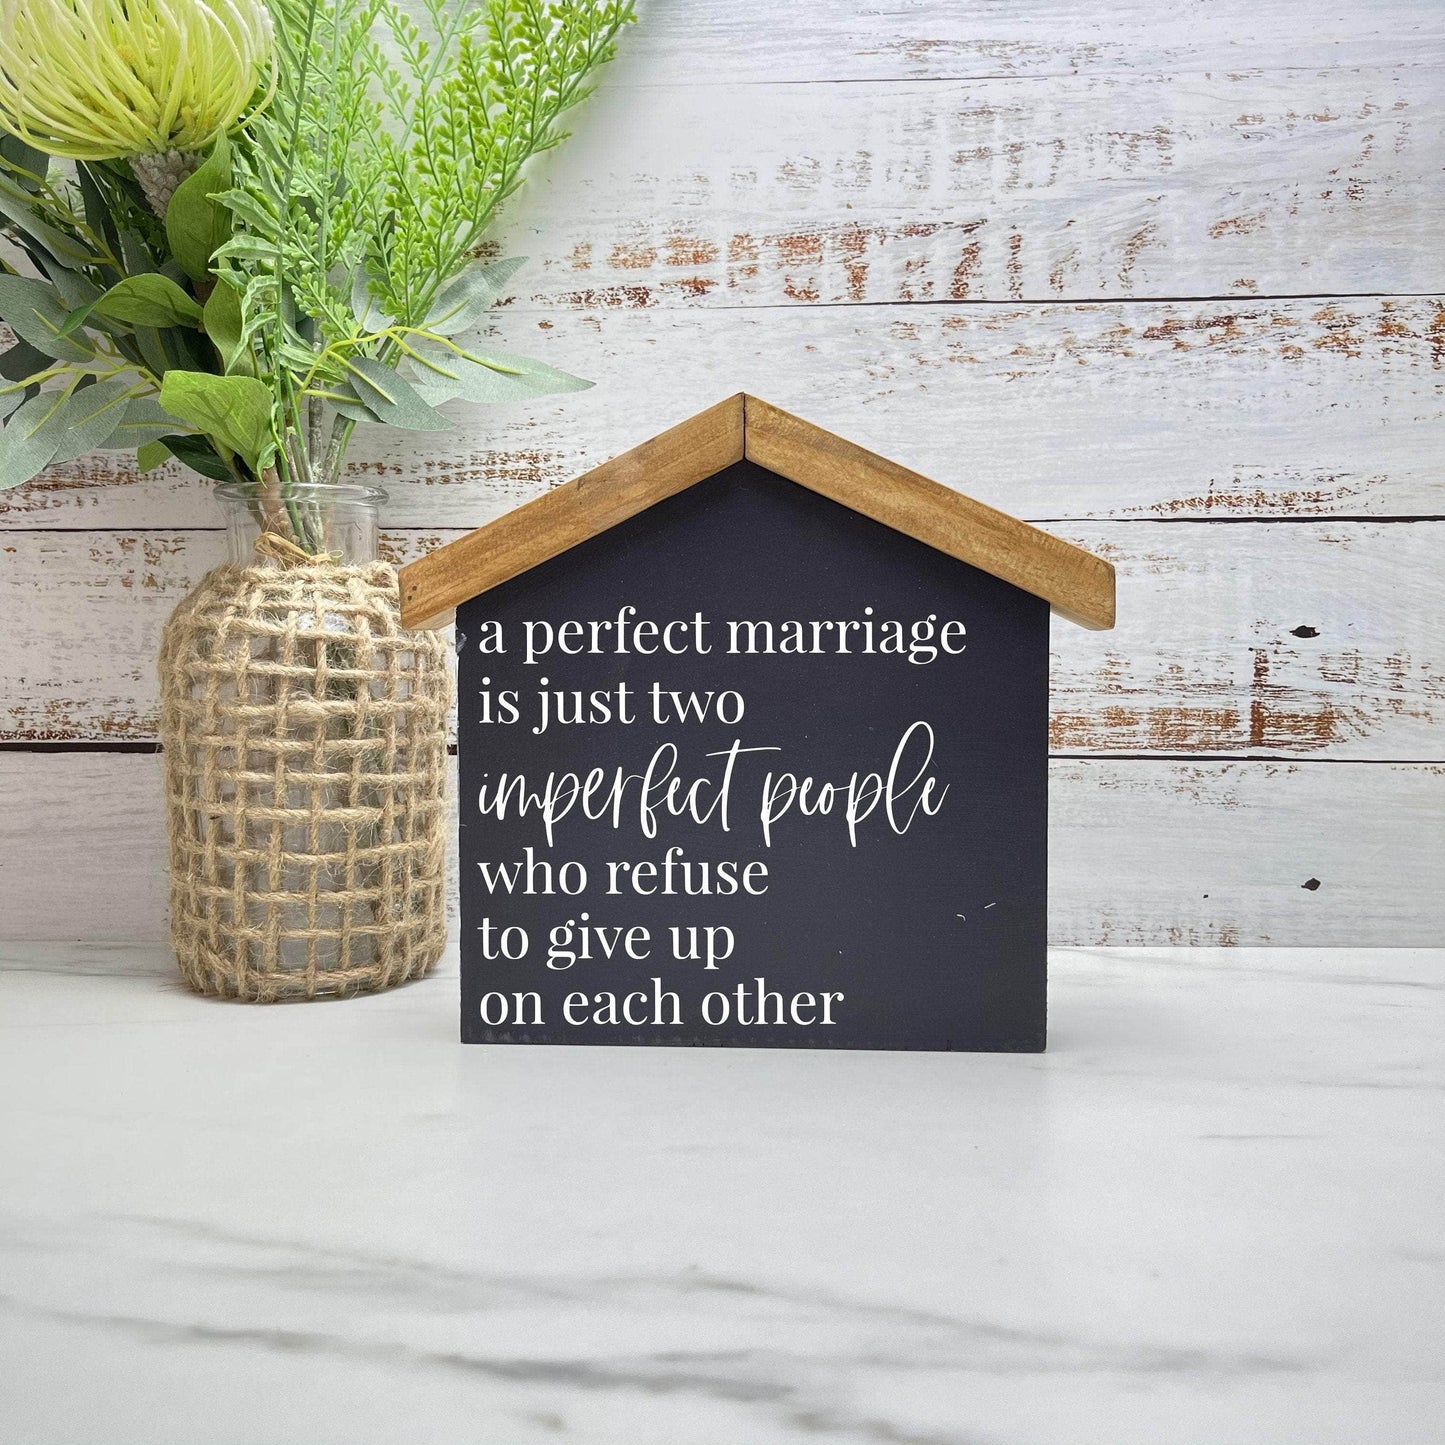 A marriage is just two imperfect people House wood sign, love sign, couples gift sign, quote sign, home decor